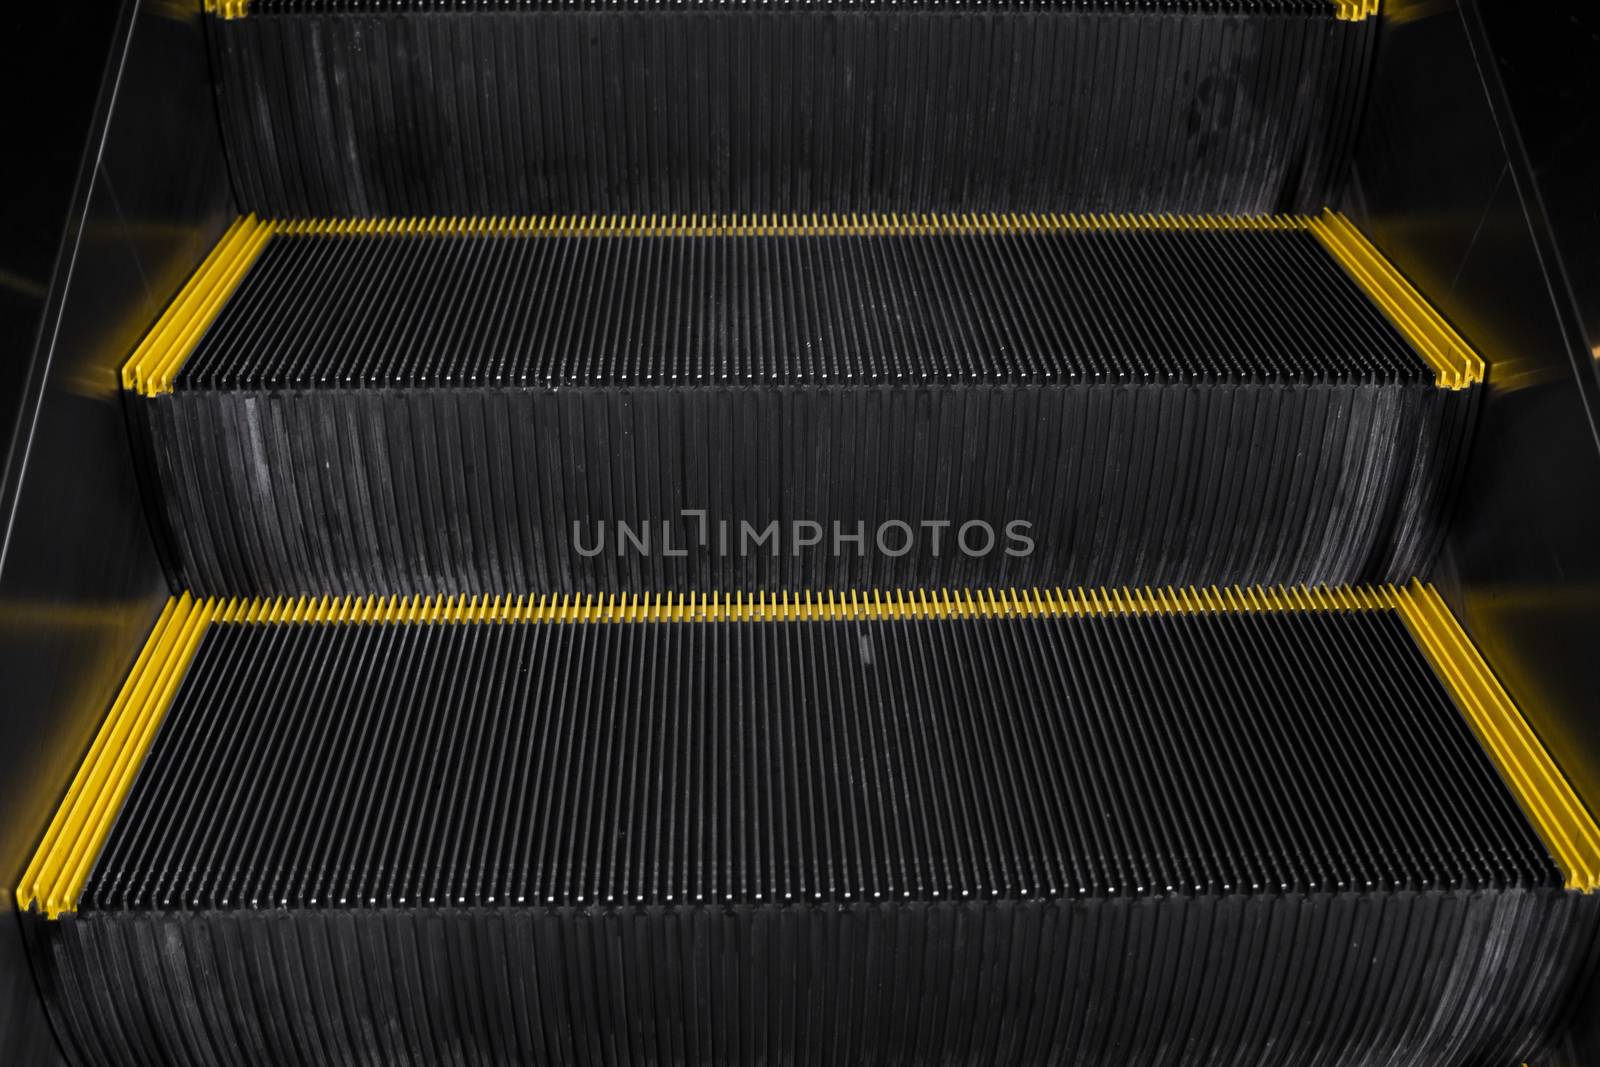 Empty escalators stairway with a yellow stripes